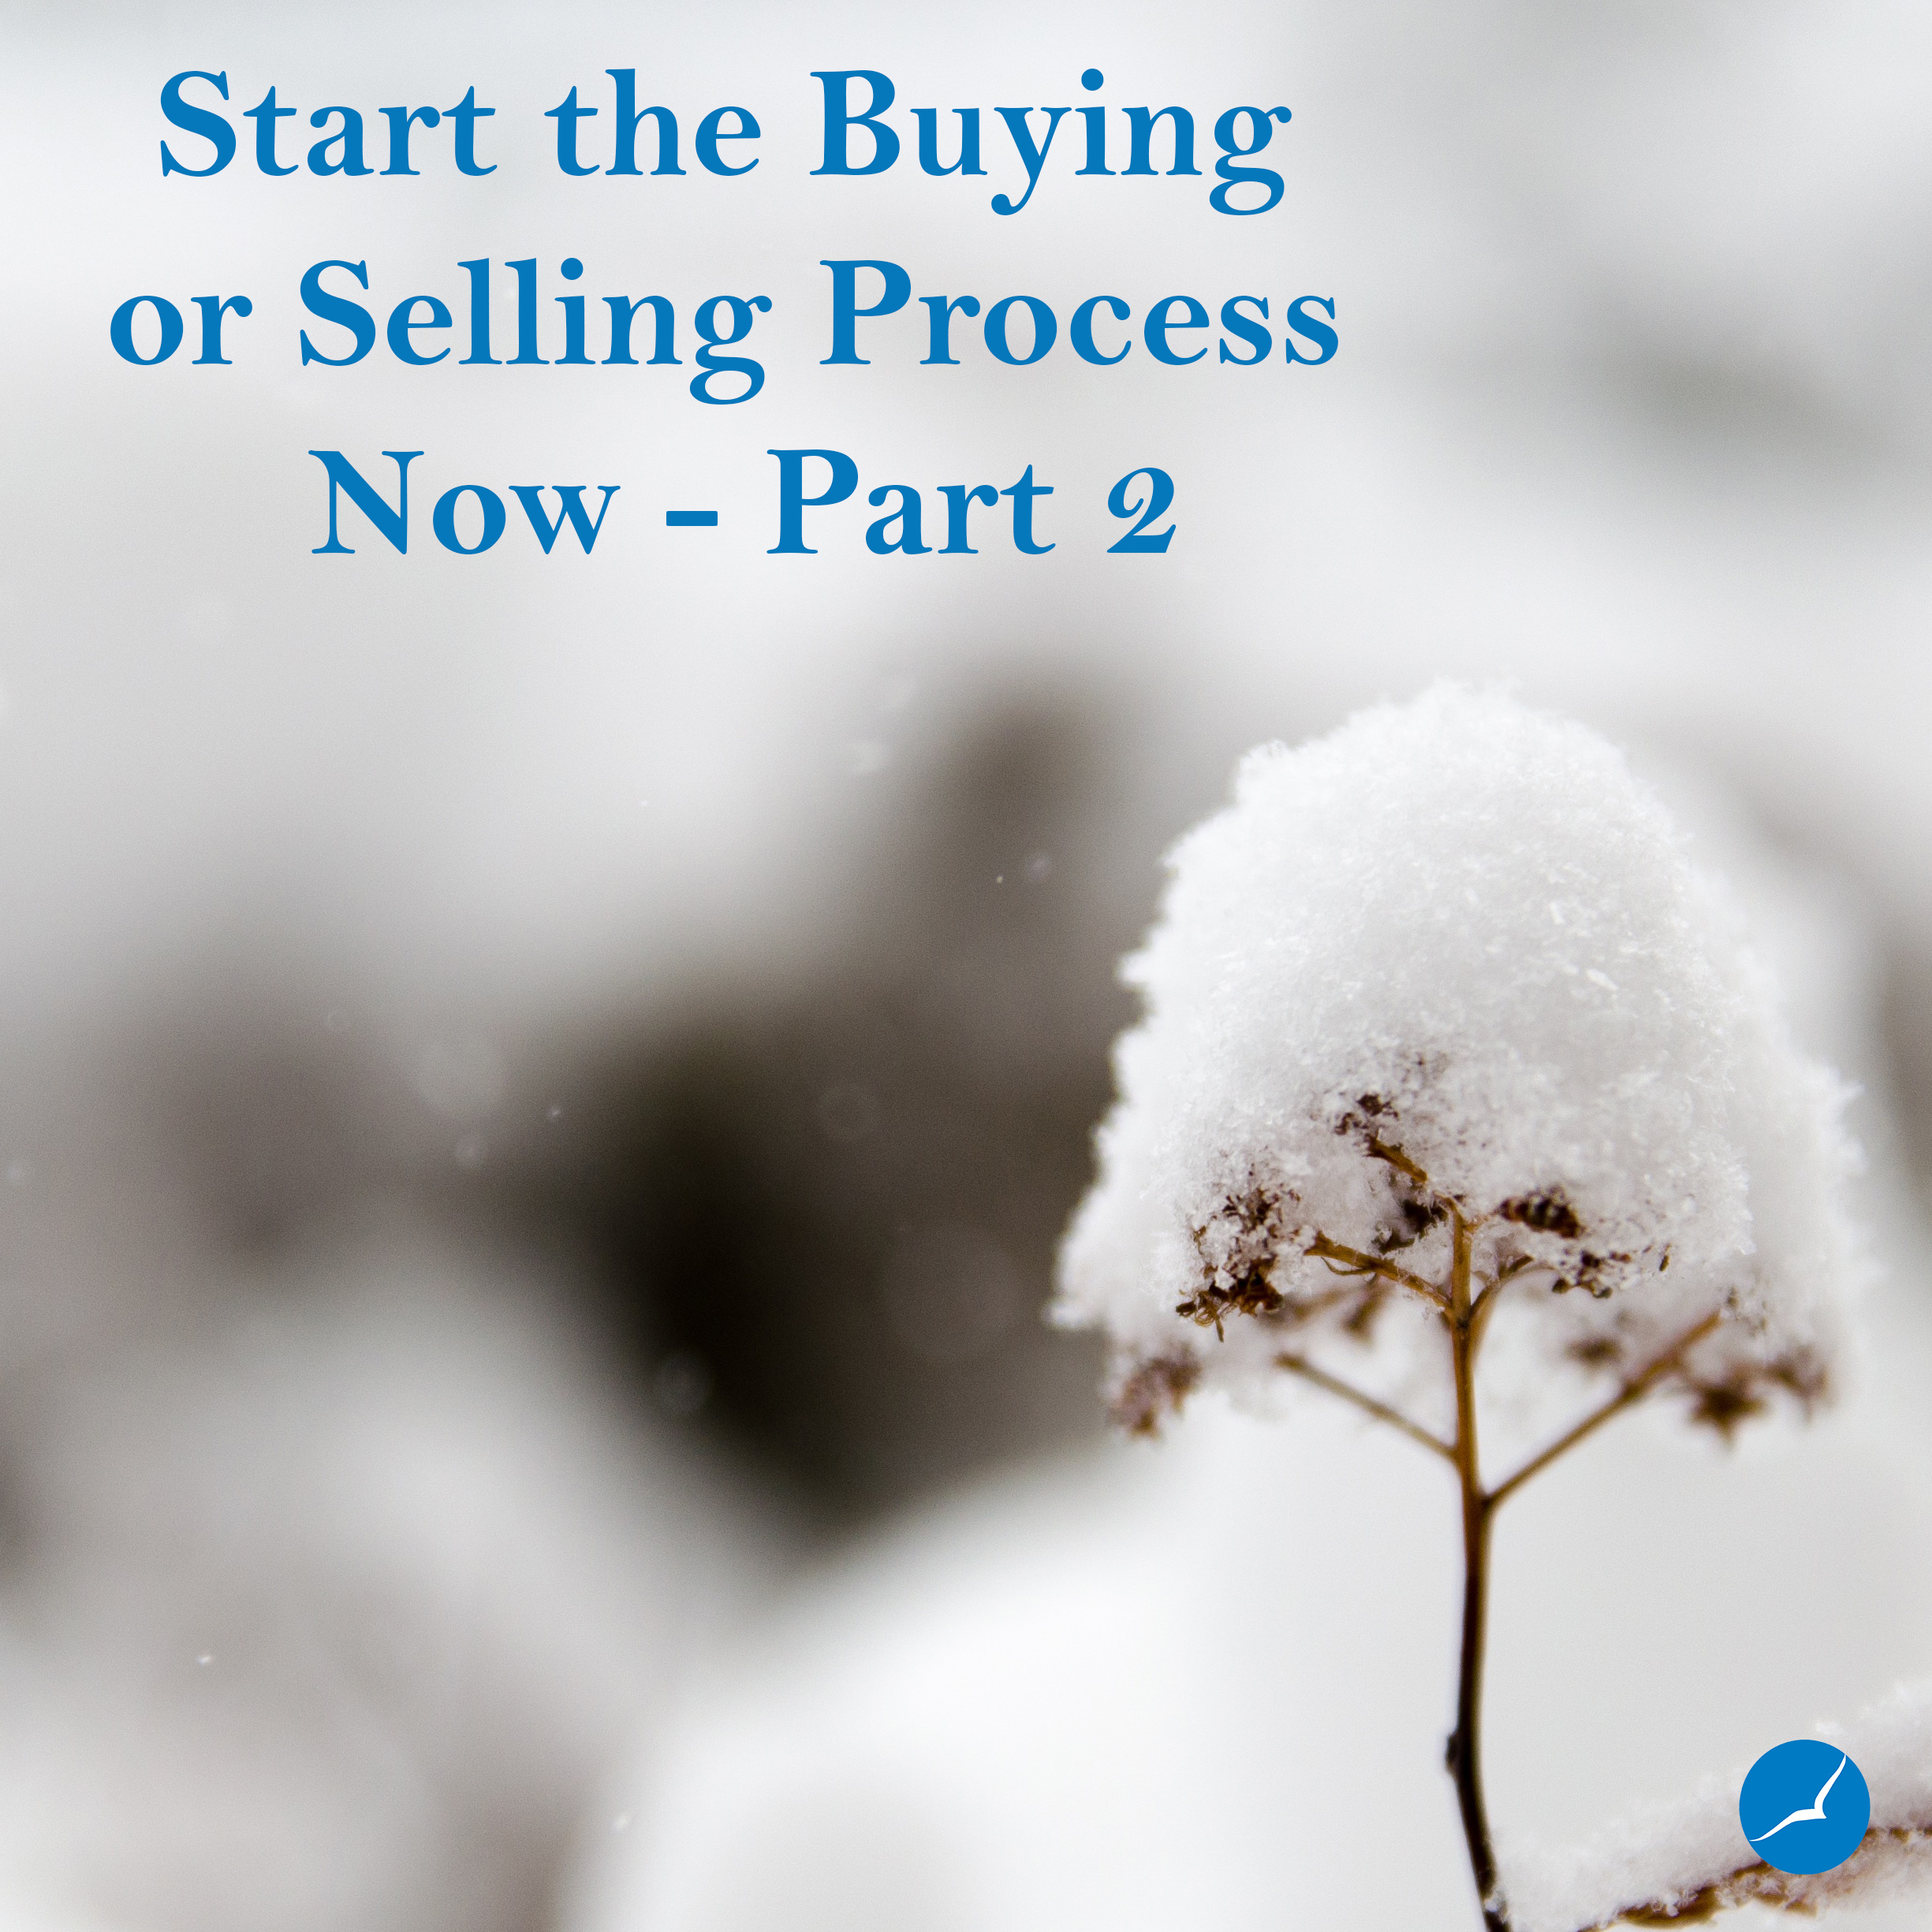 Start the Buying or Selling Process Now